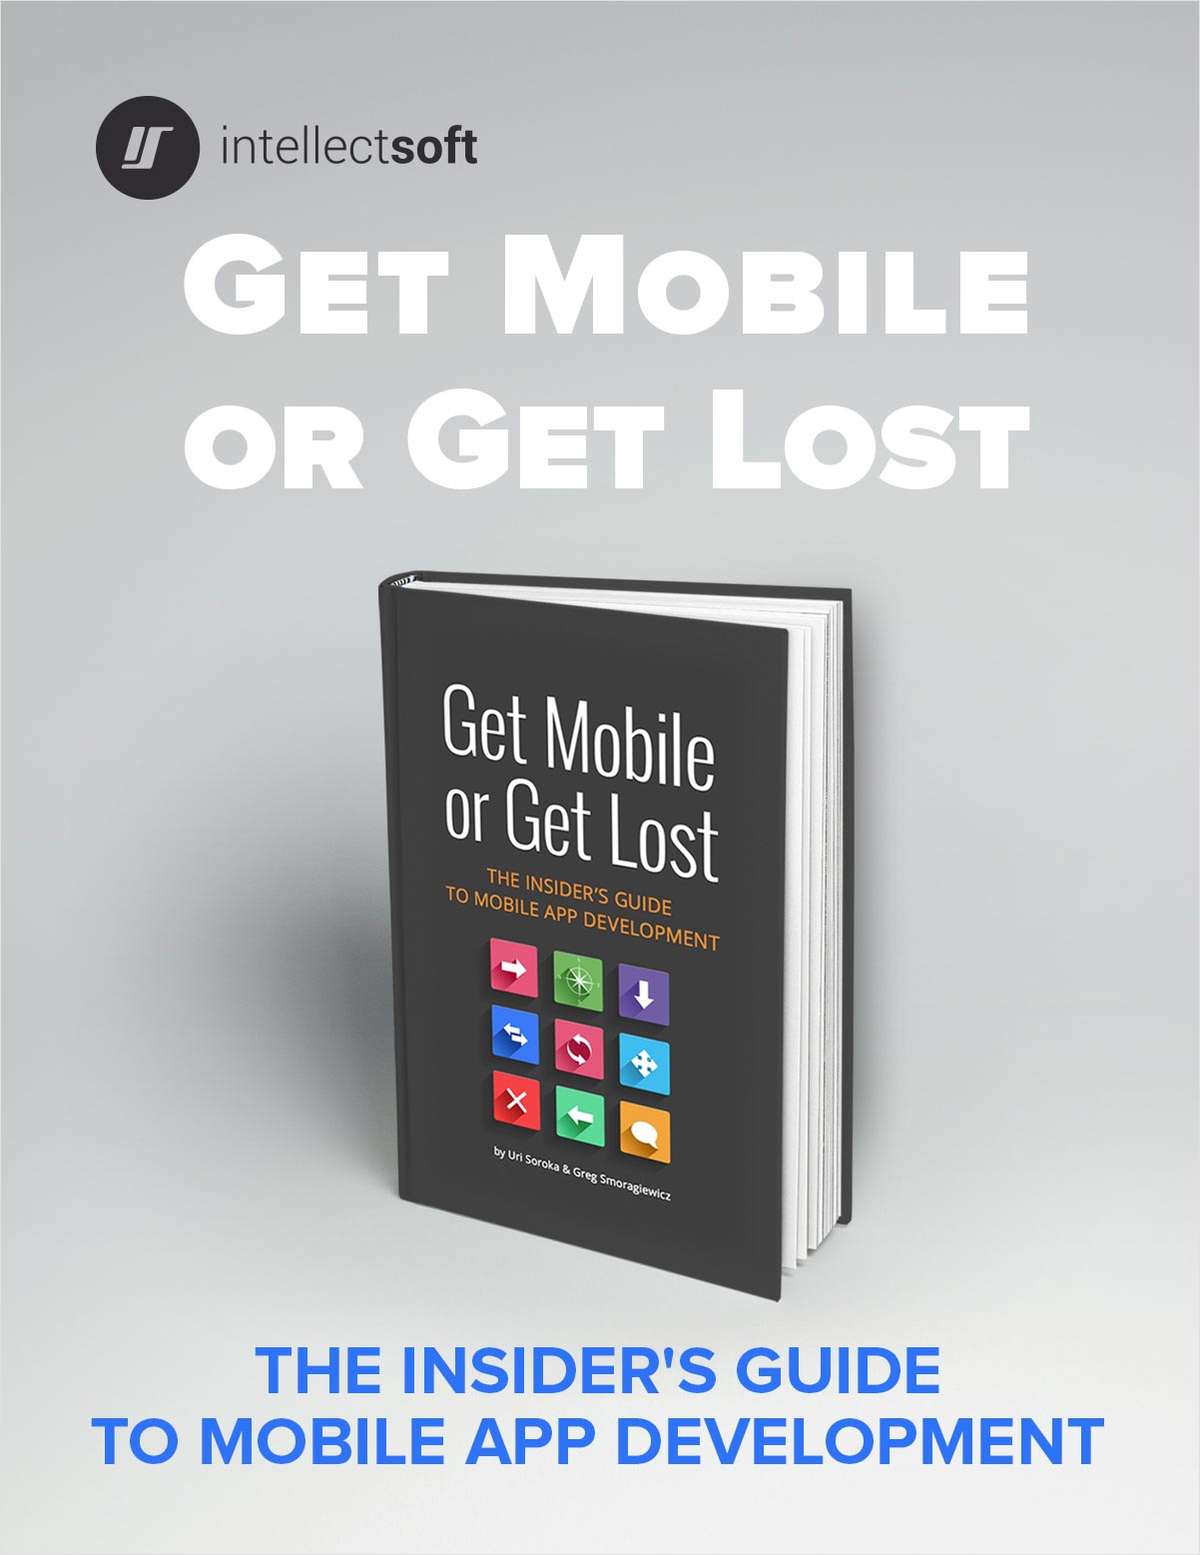 Get Mobile or Get Lost